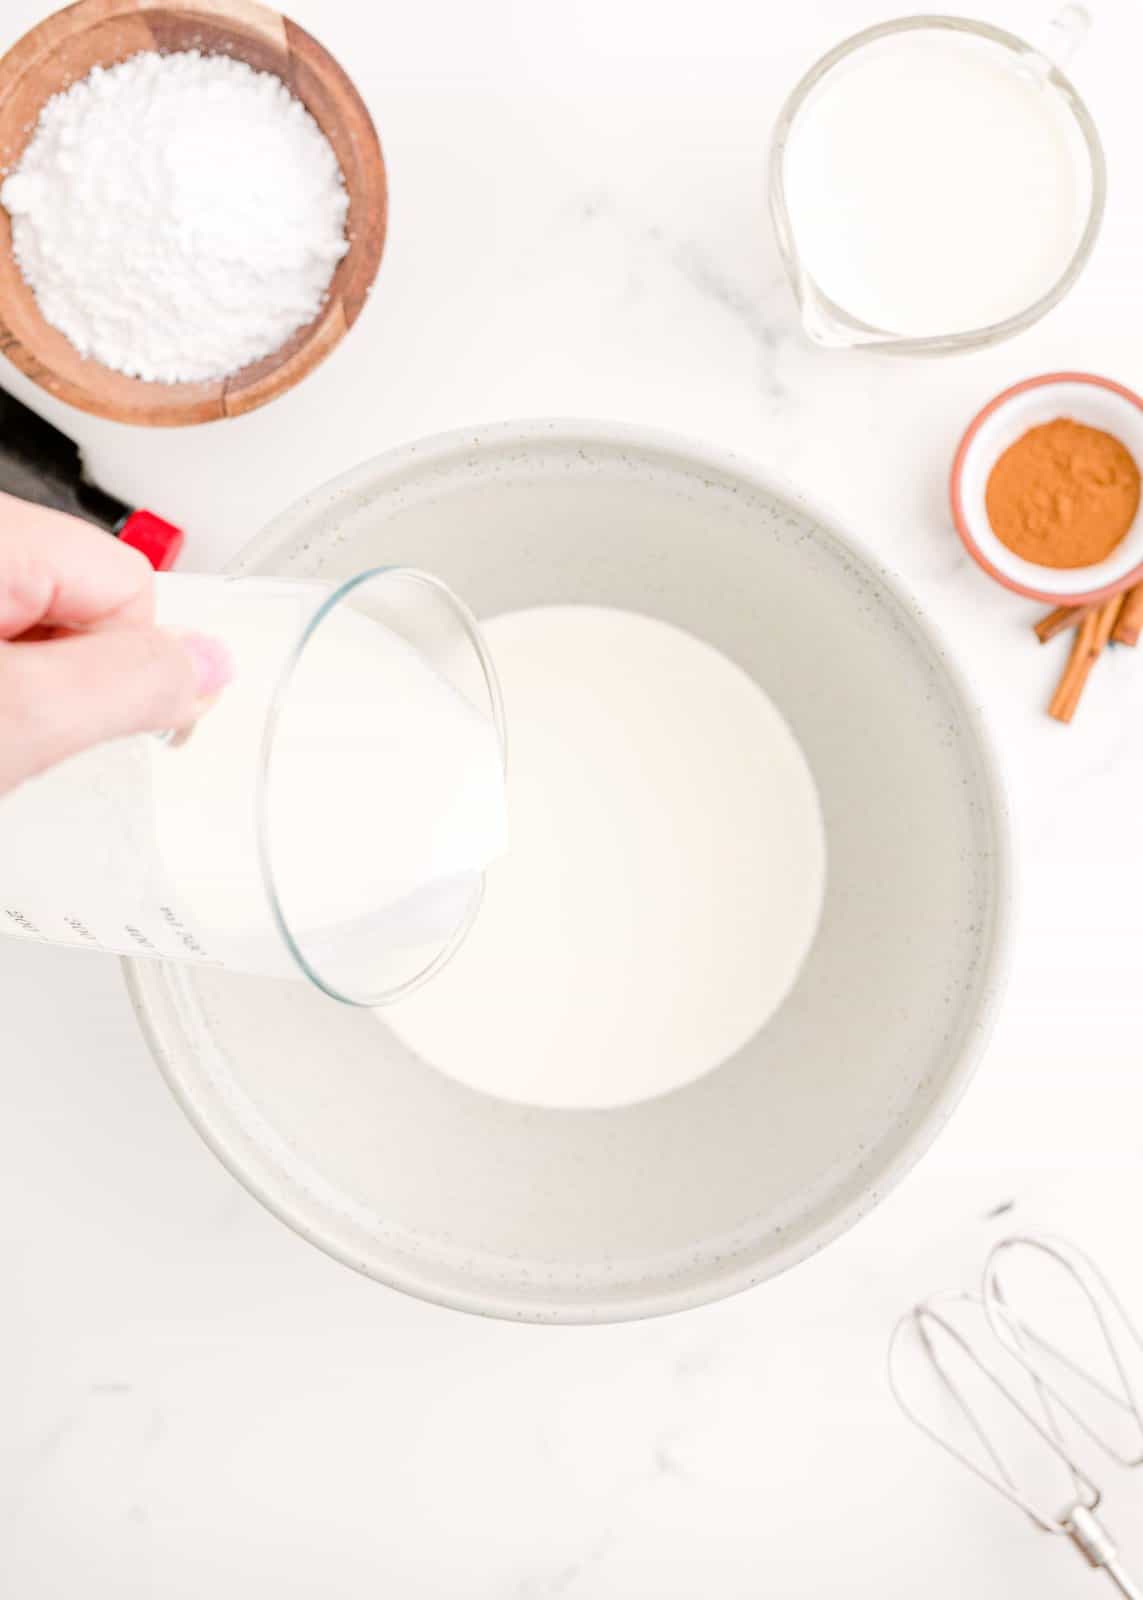 Heavy cream being poured into bowl.